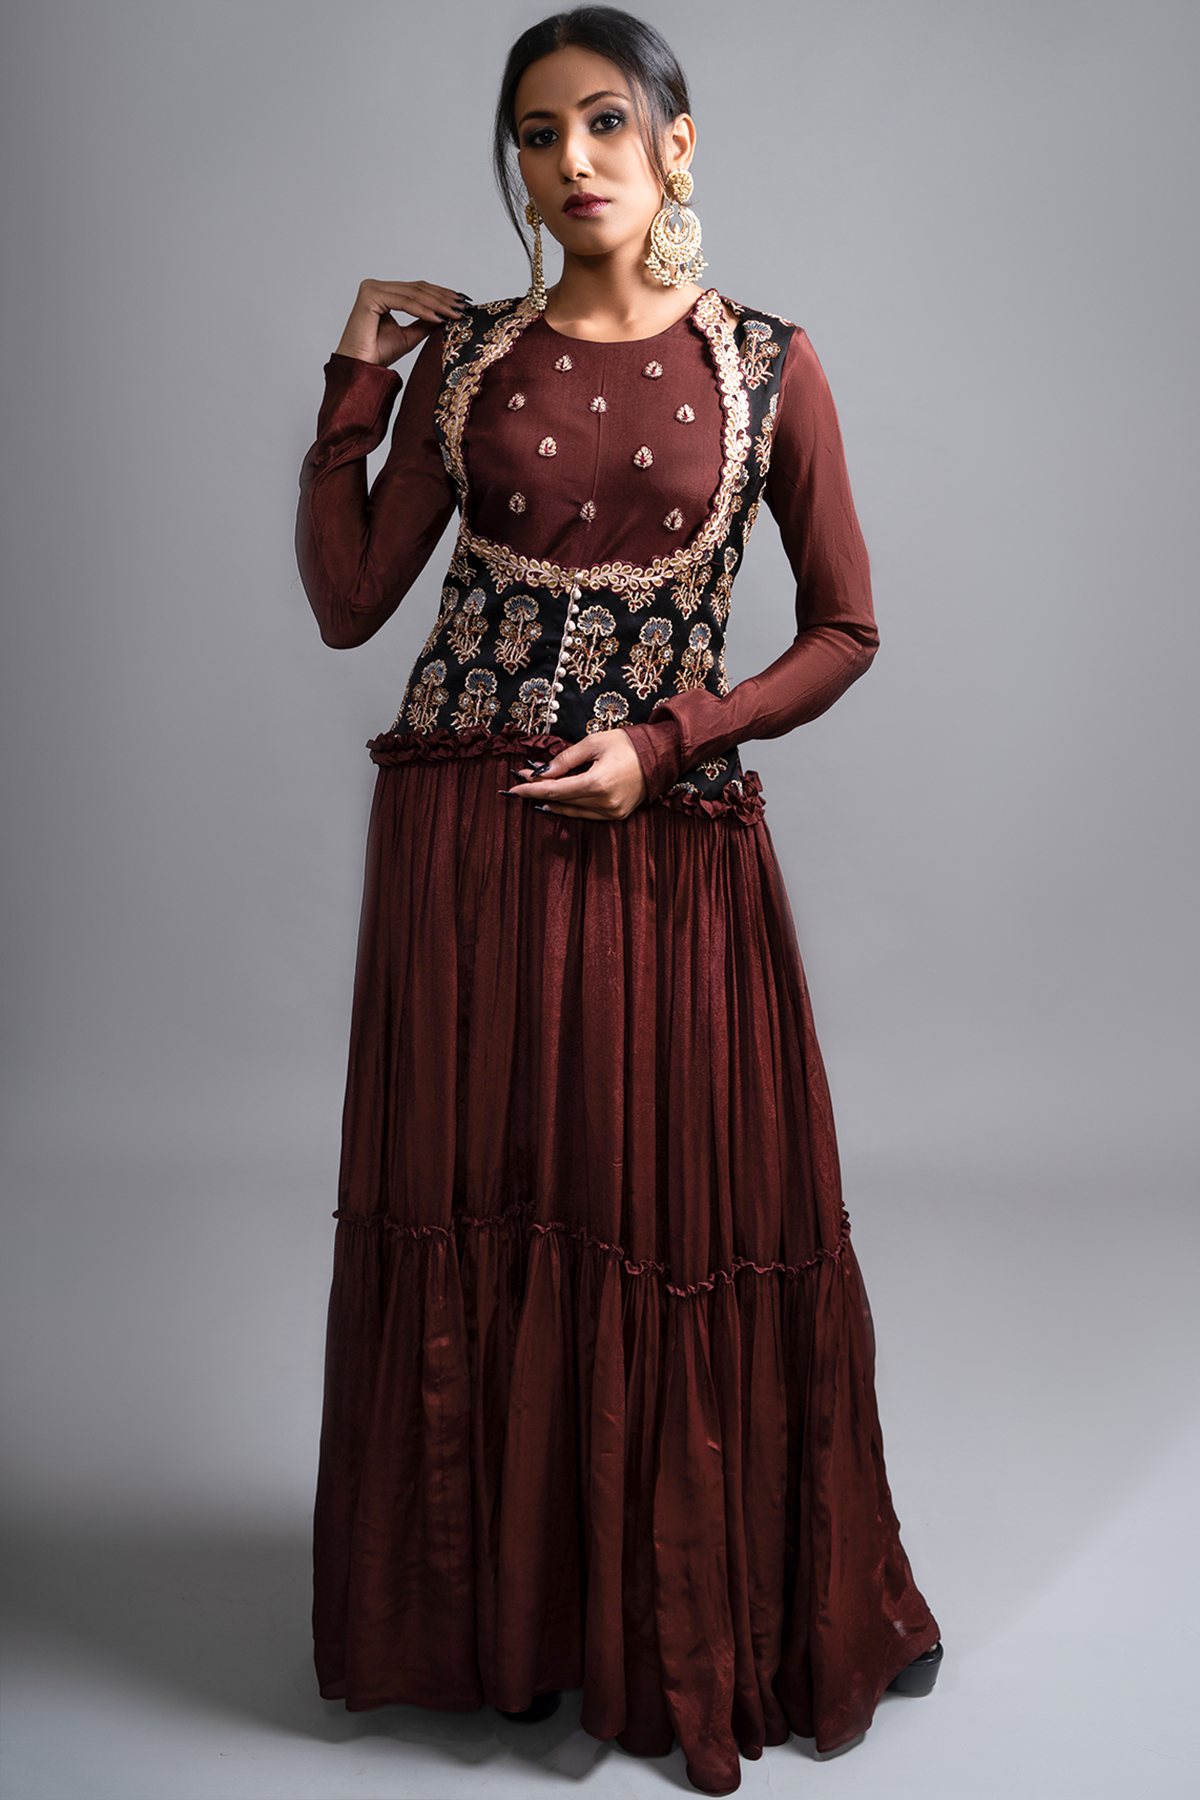 "Mesmerizing Maroon Pleated Gown paired with a Waist Koti Style Ajrak Jacket in Mashru Silk, adorned with intricate and beautiful work. Embrace the allure!"